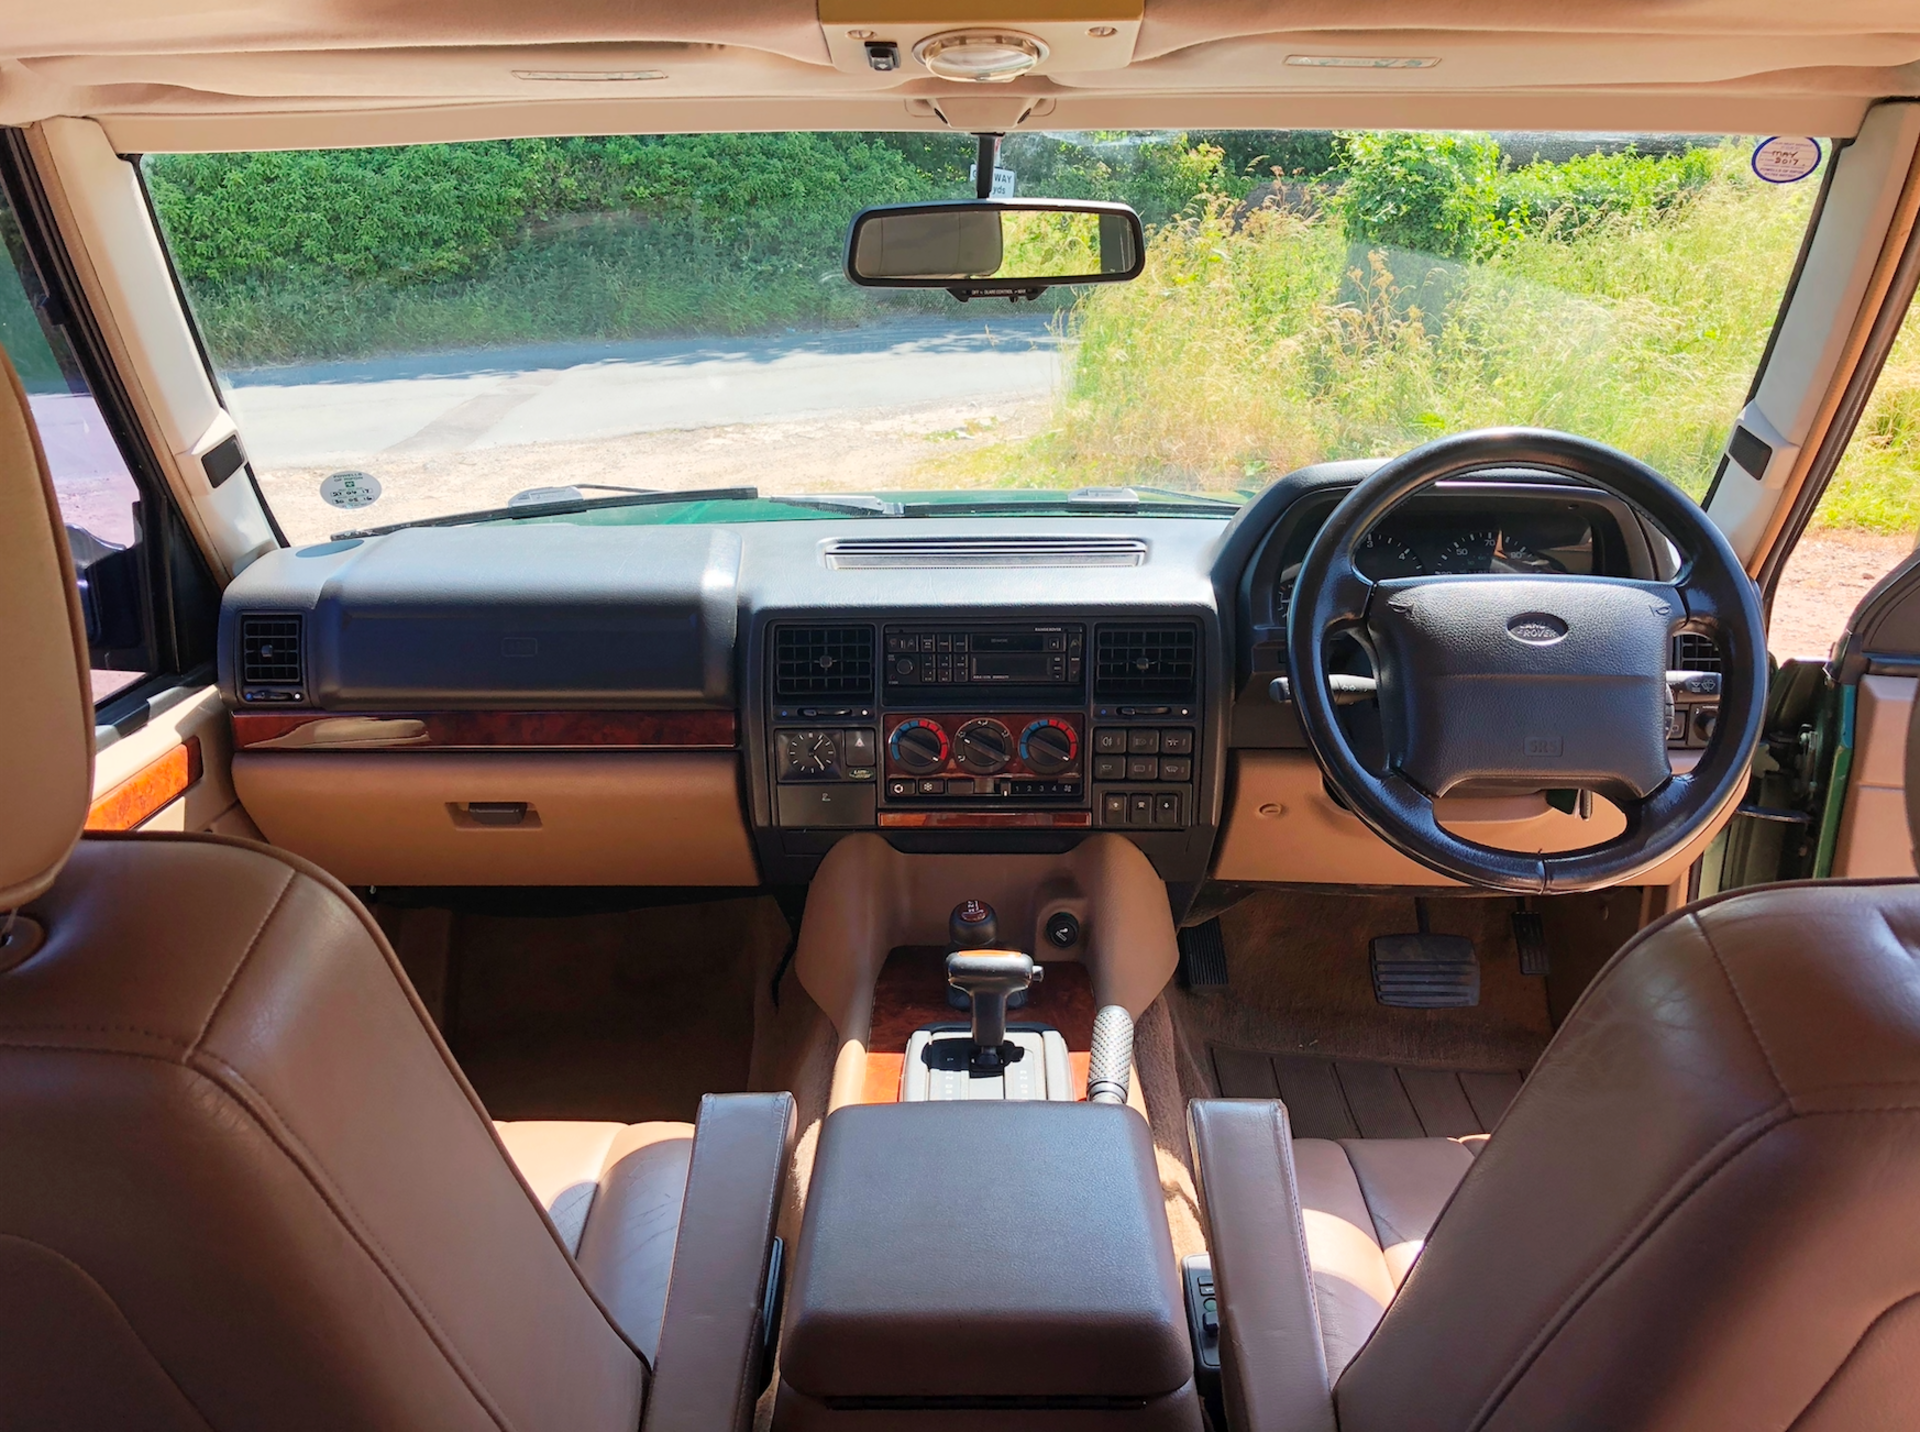 Range Rover, Classic Vogue LSE - Image 17 of 21